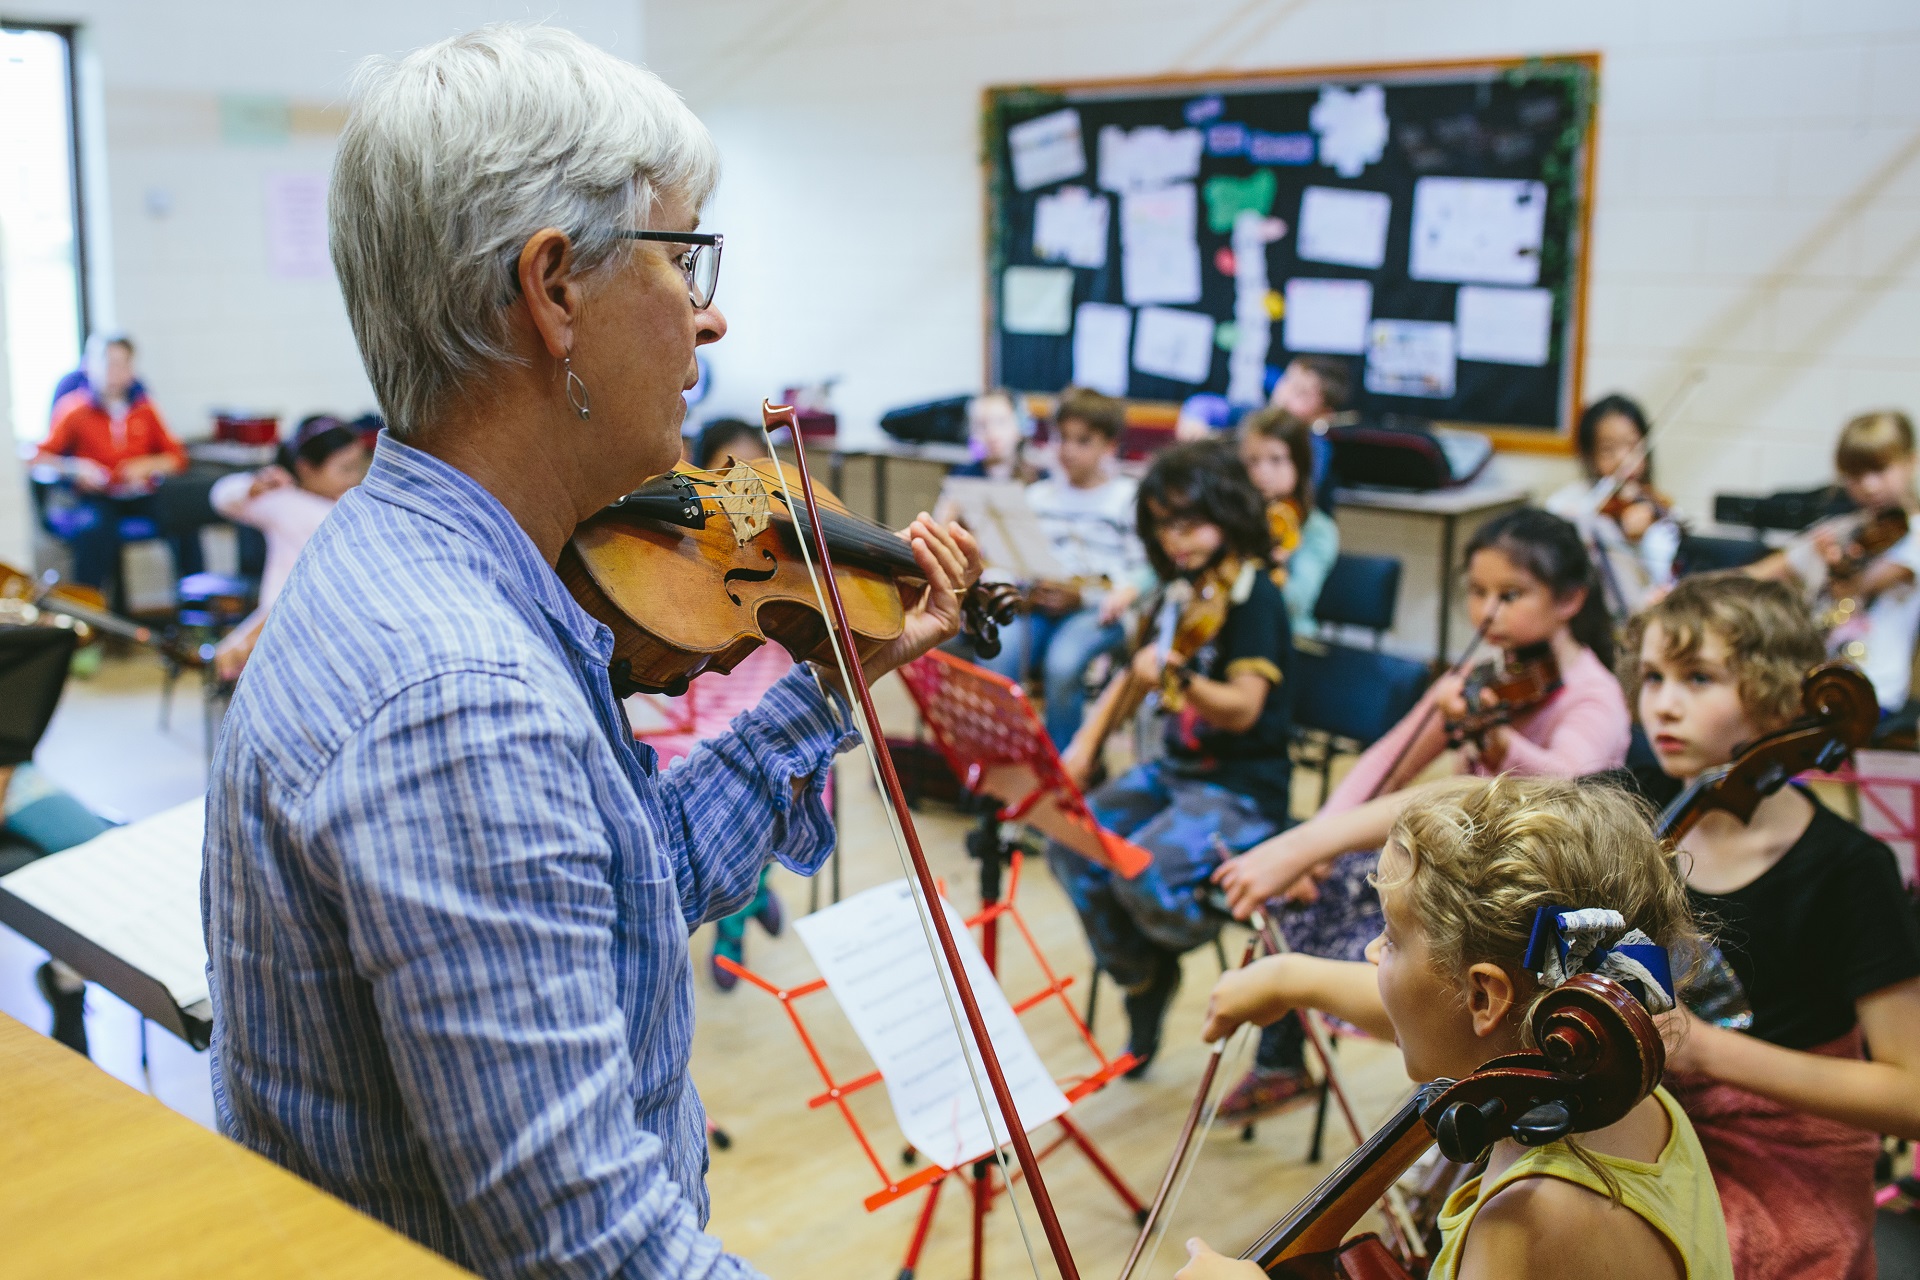 A violin teacher stands in front of a classroom of children holding stringed instruments.